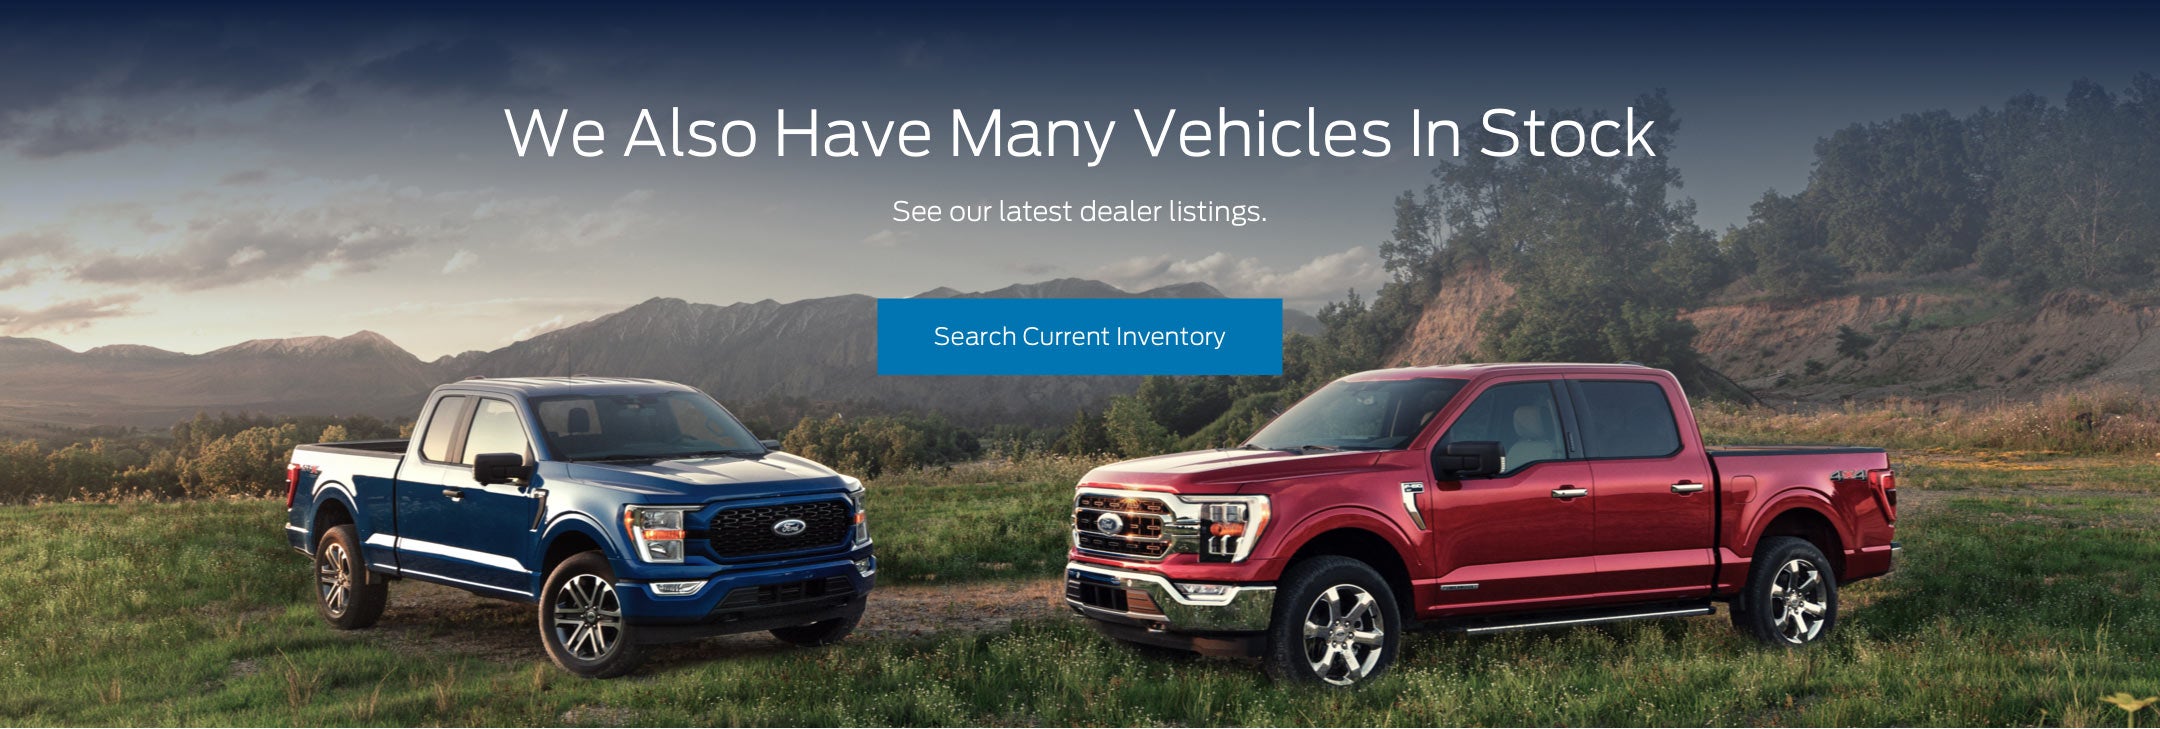 Ford vehicles in stock | Nick Mayer Ford West in Avon Lake OH